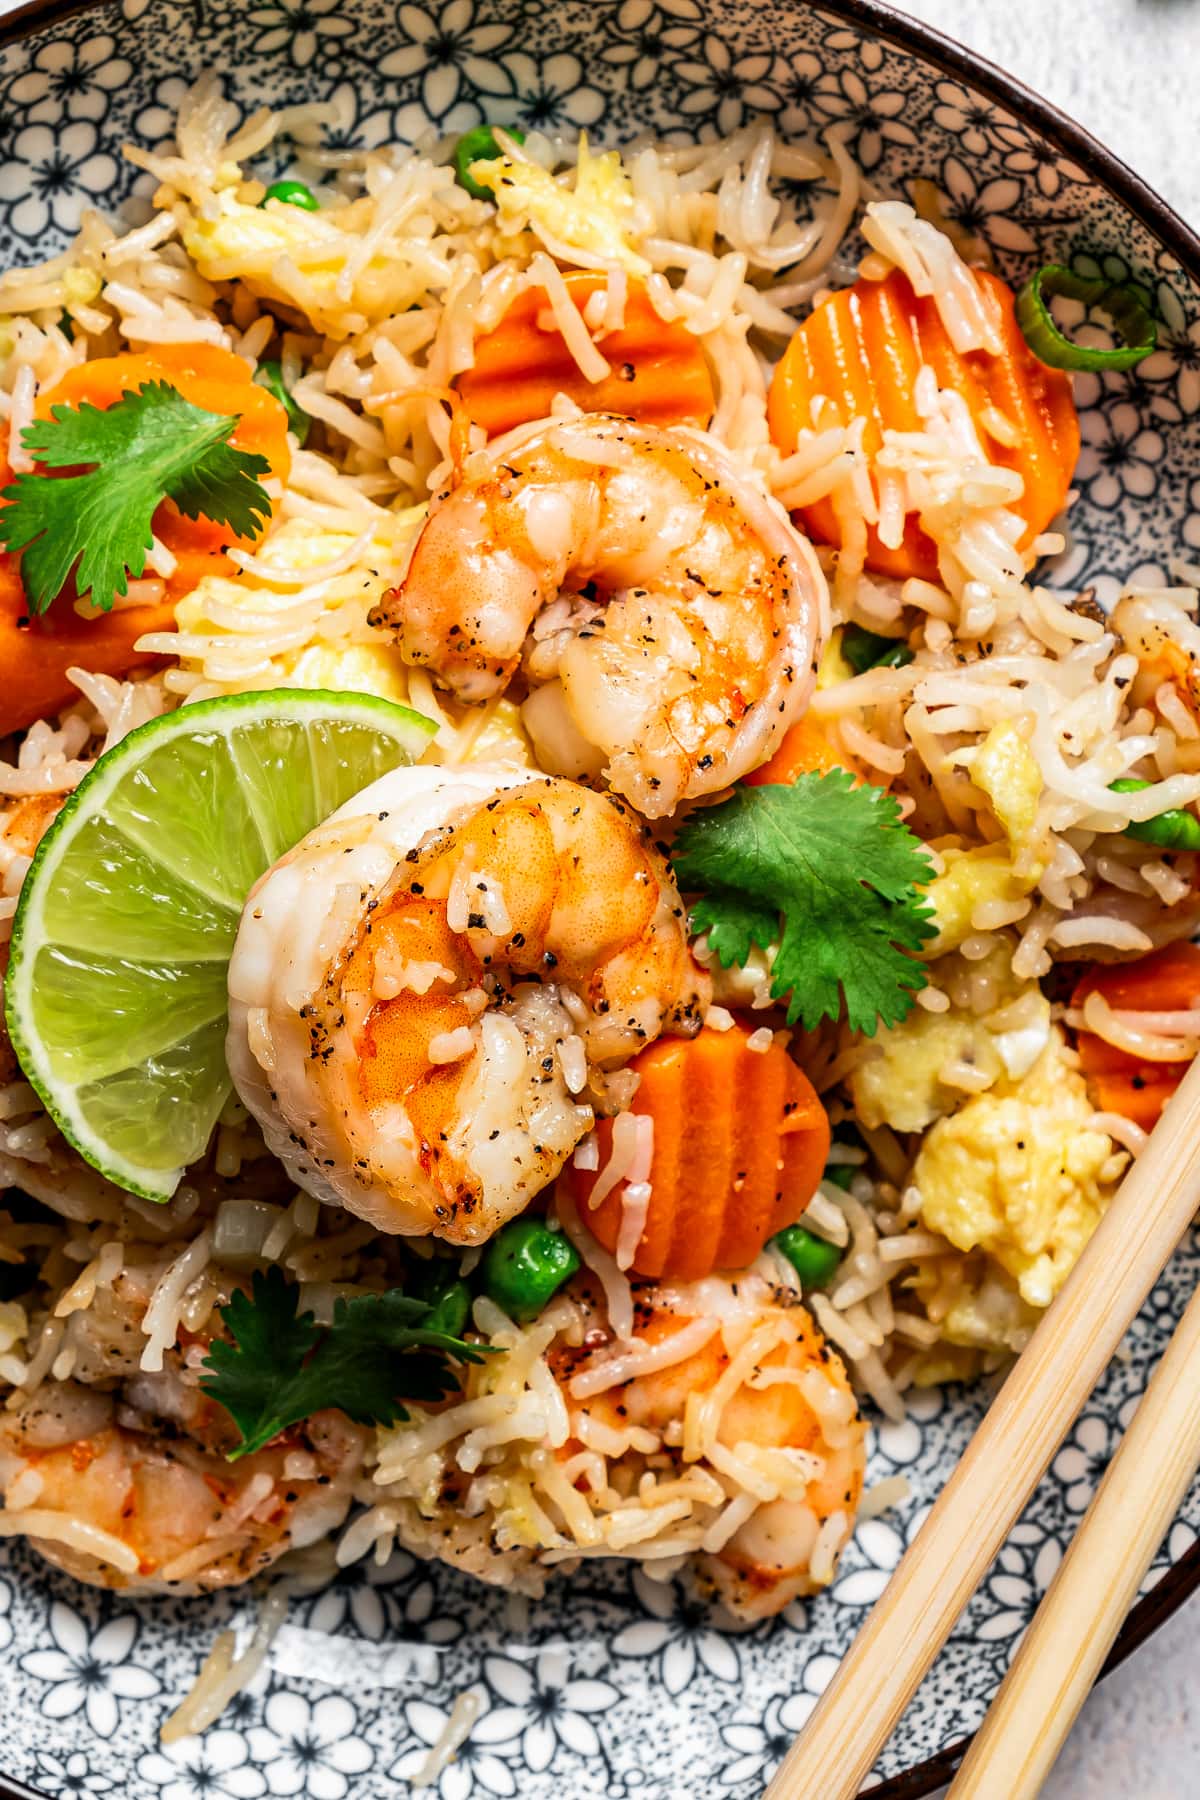 Close-up image of fried rice topped with shrimp, veggies, and a wedge of lime.